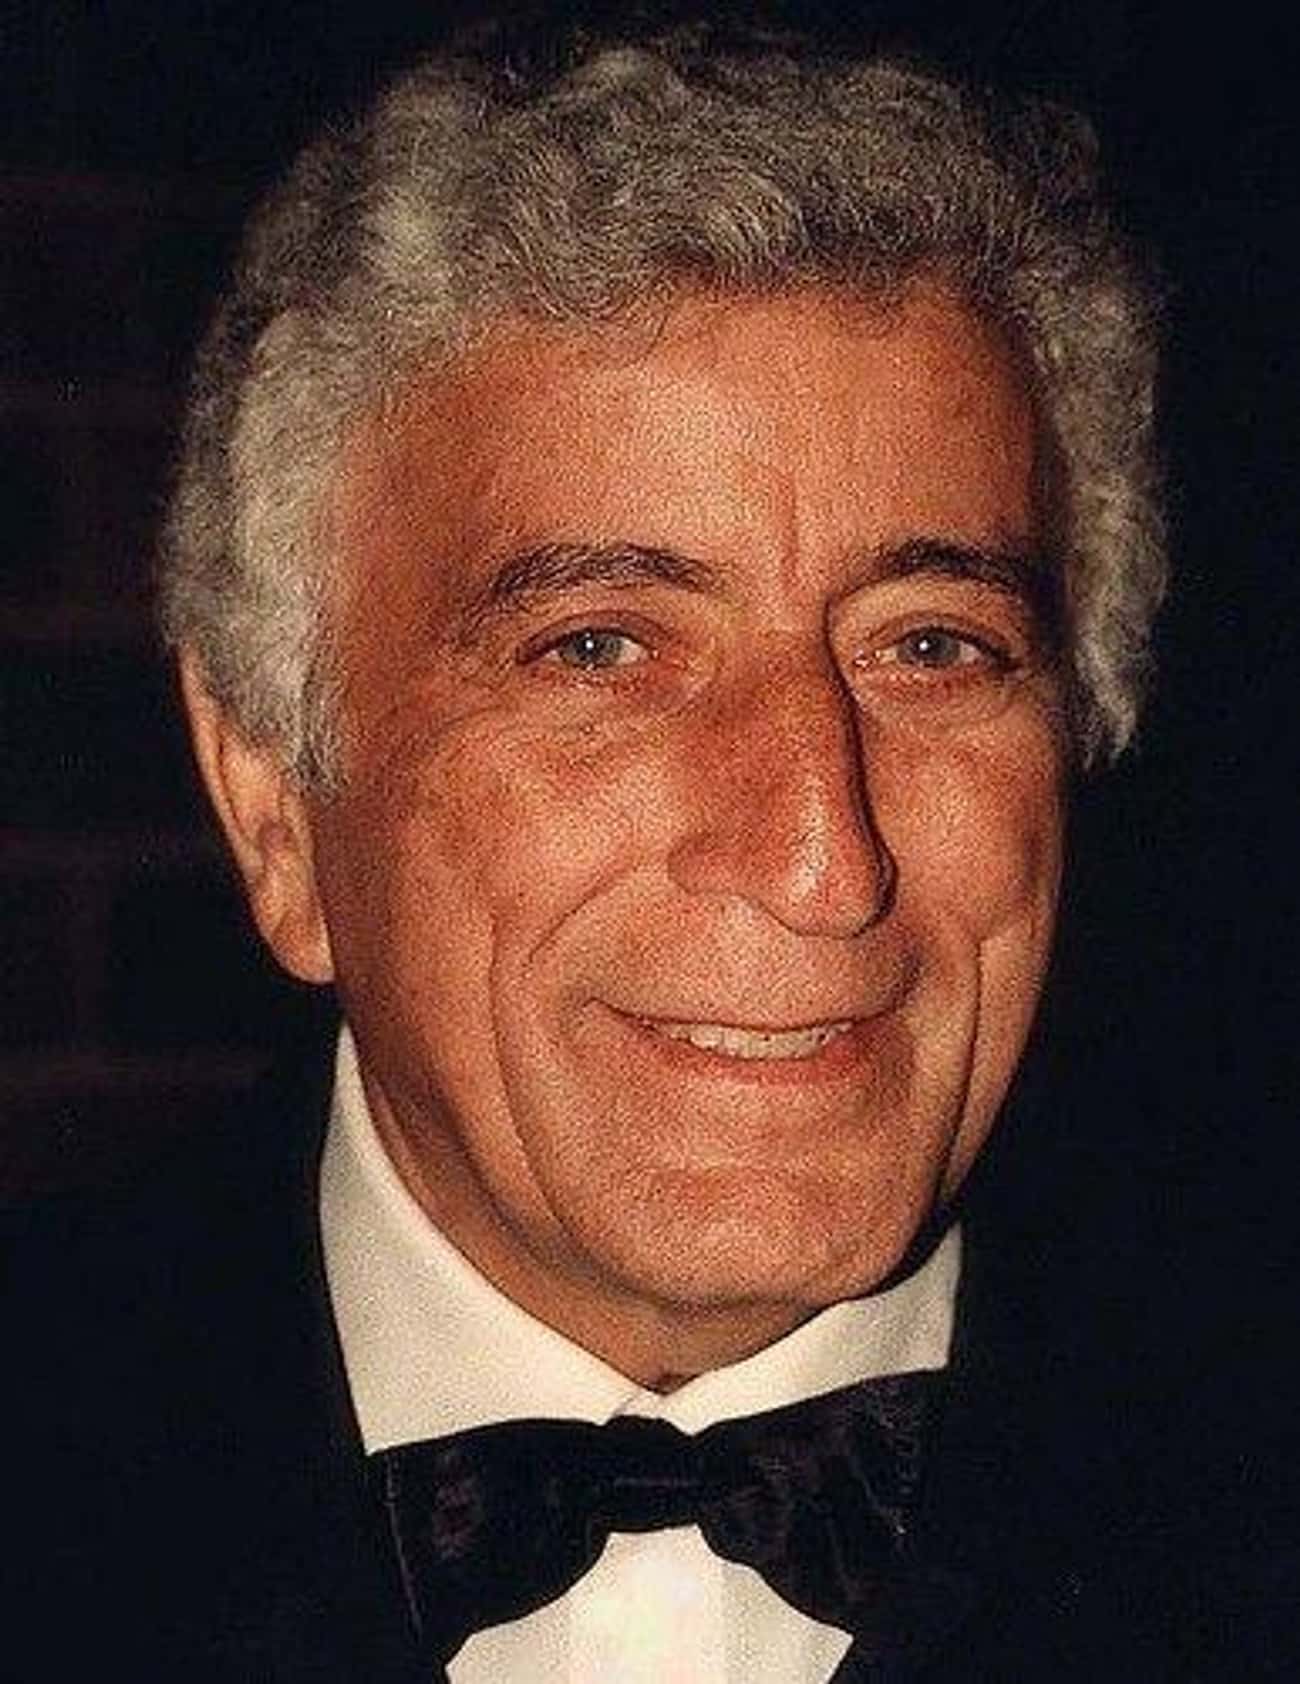 Tony Bennett Was On The Army Frontline In France And Germany During WWII